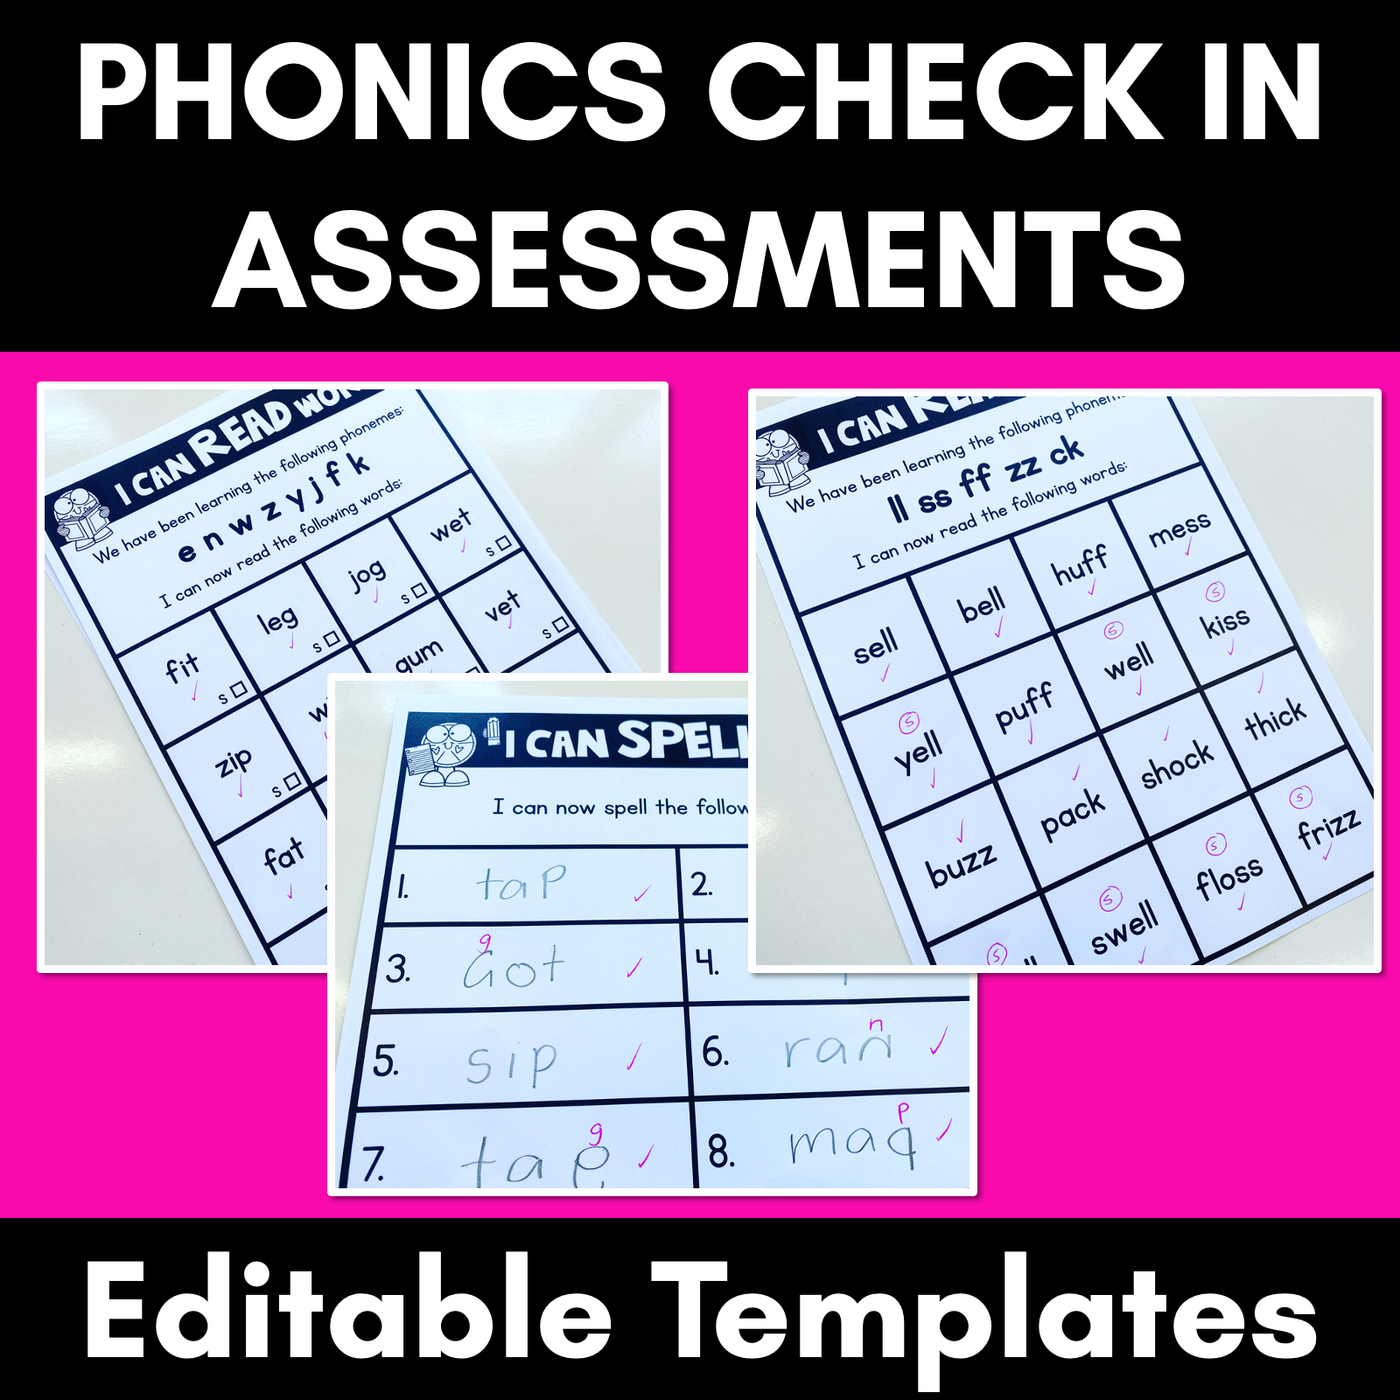 Phonics Check In Assessment Templates